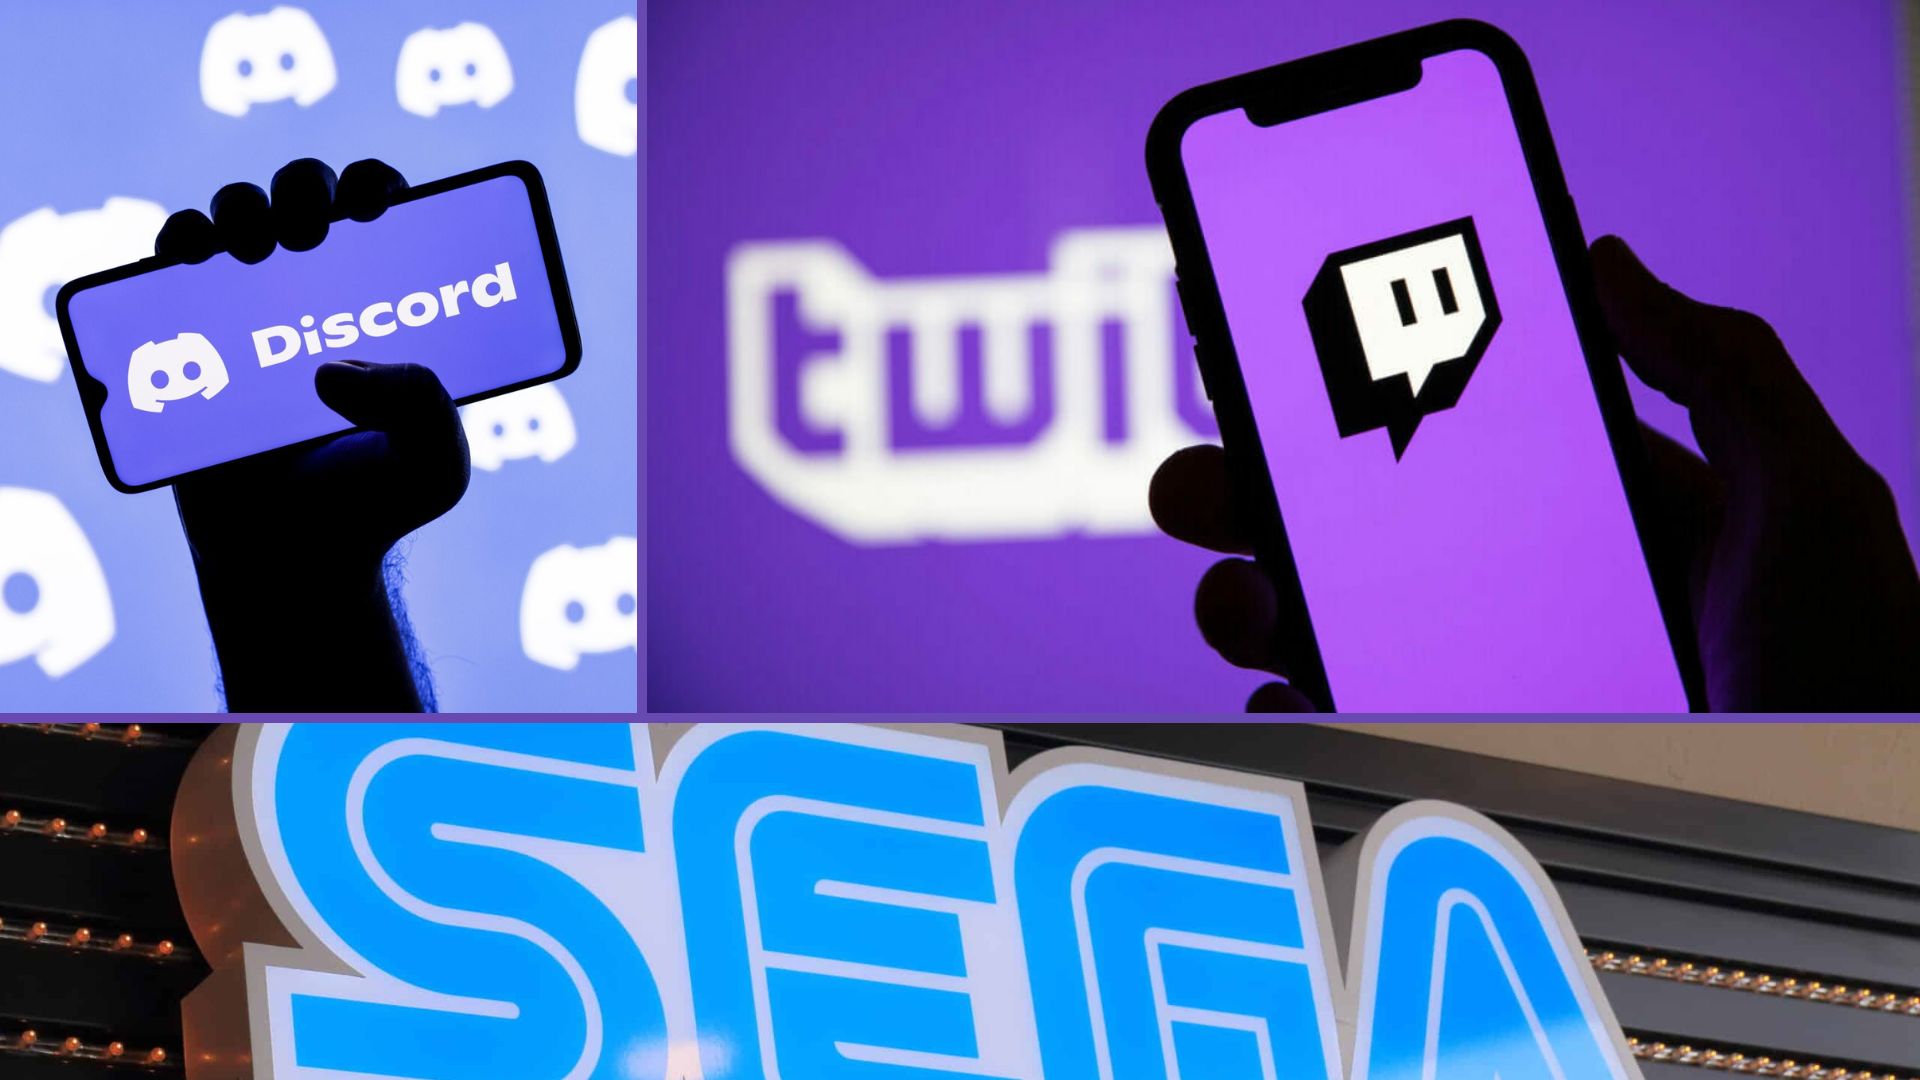 Sega, Discord, Twitch To Layoff 61, 160, And 218 Employees Respectively, WARN Notice Reveals